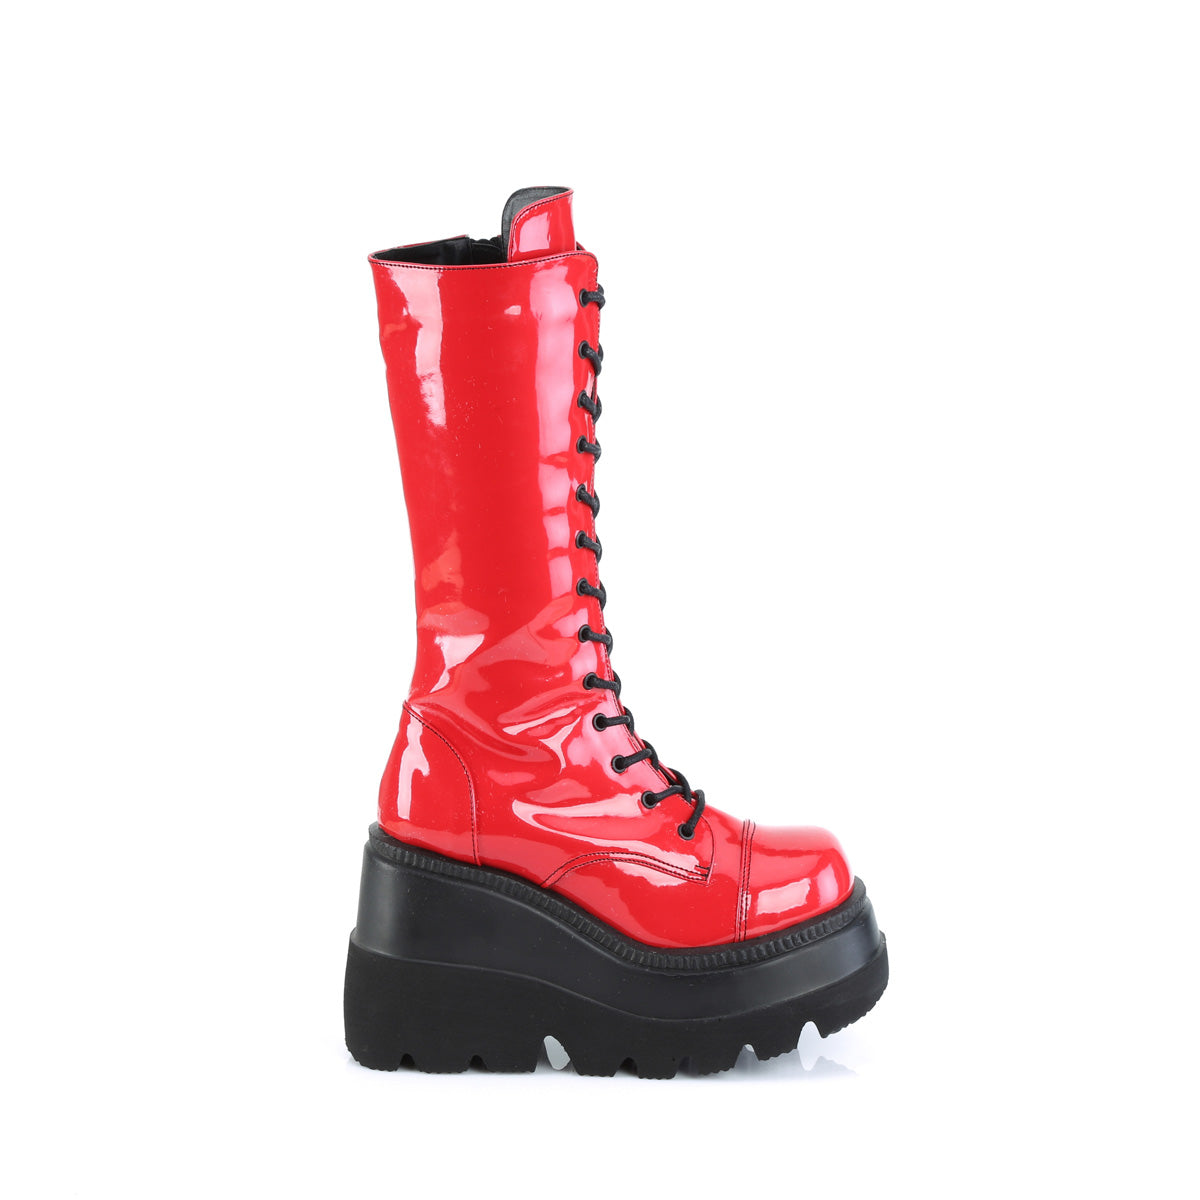 SHAKER-72 Red Patent Mid-Calf Boots